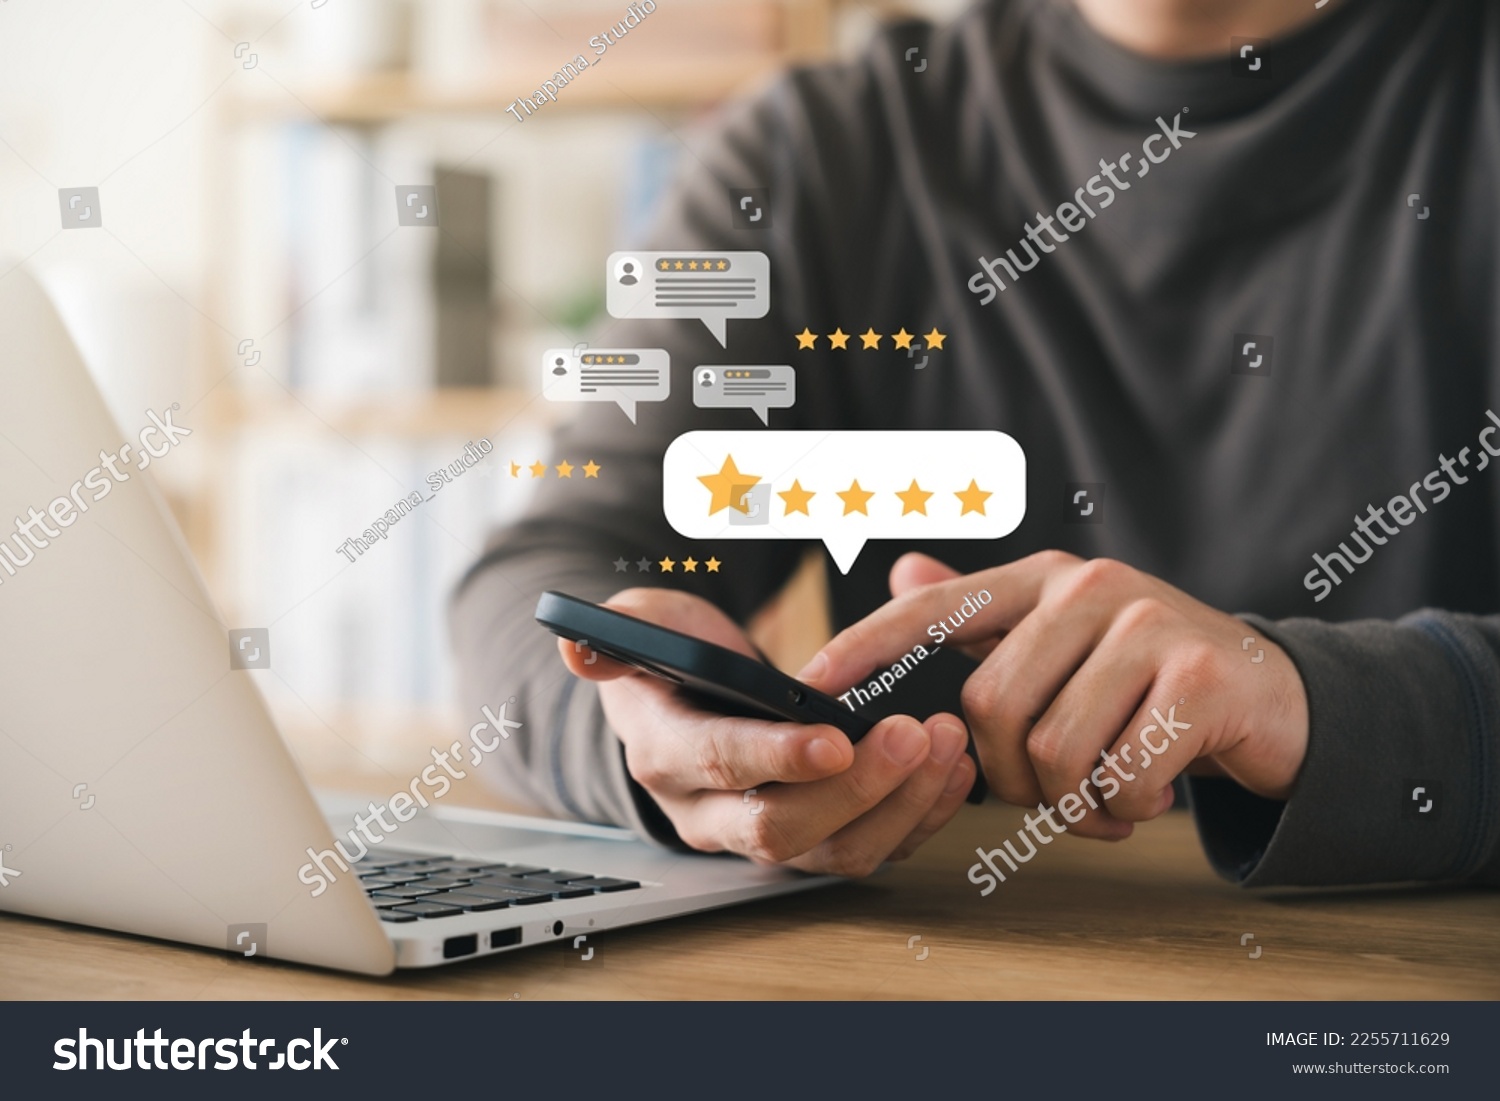 Customer Satisfaction Survey concept, 5-star satisfaction, service experience rating online application, customer evaluation product service quality, satisfaction feedback review, good quality most. #2255711629